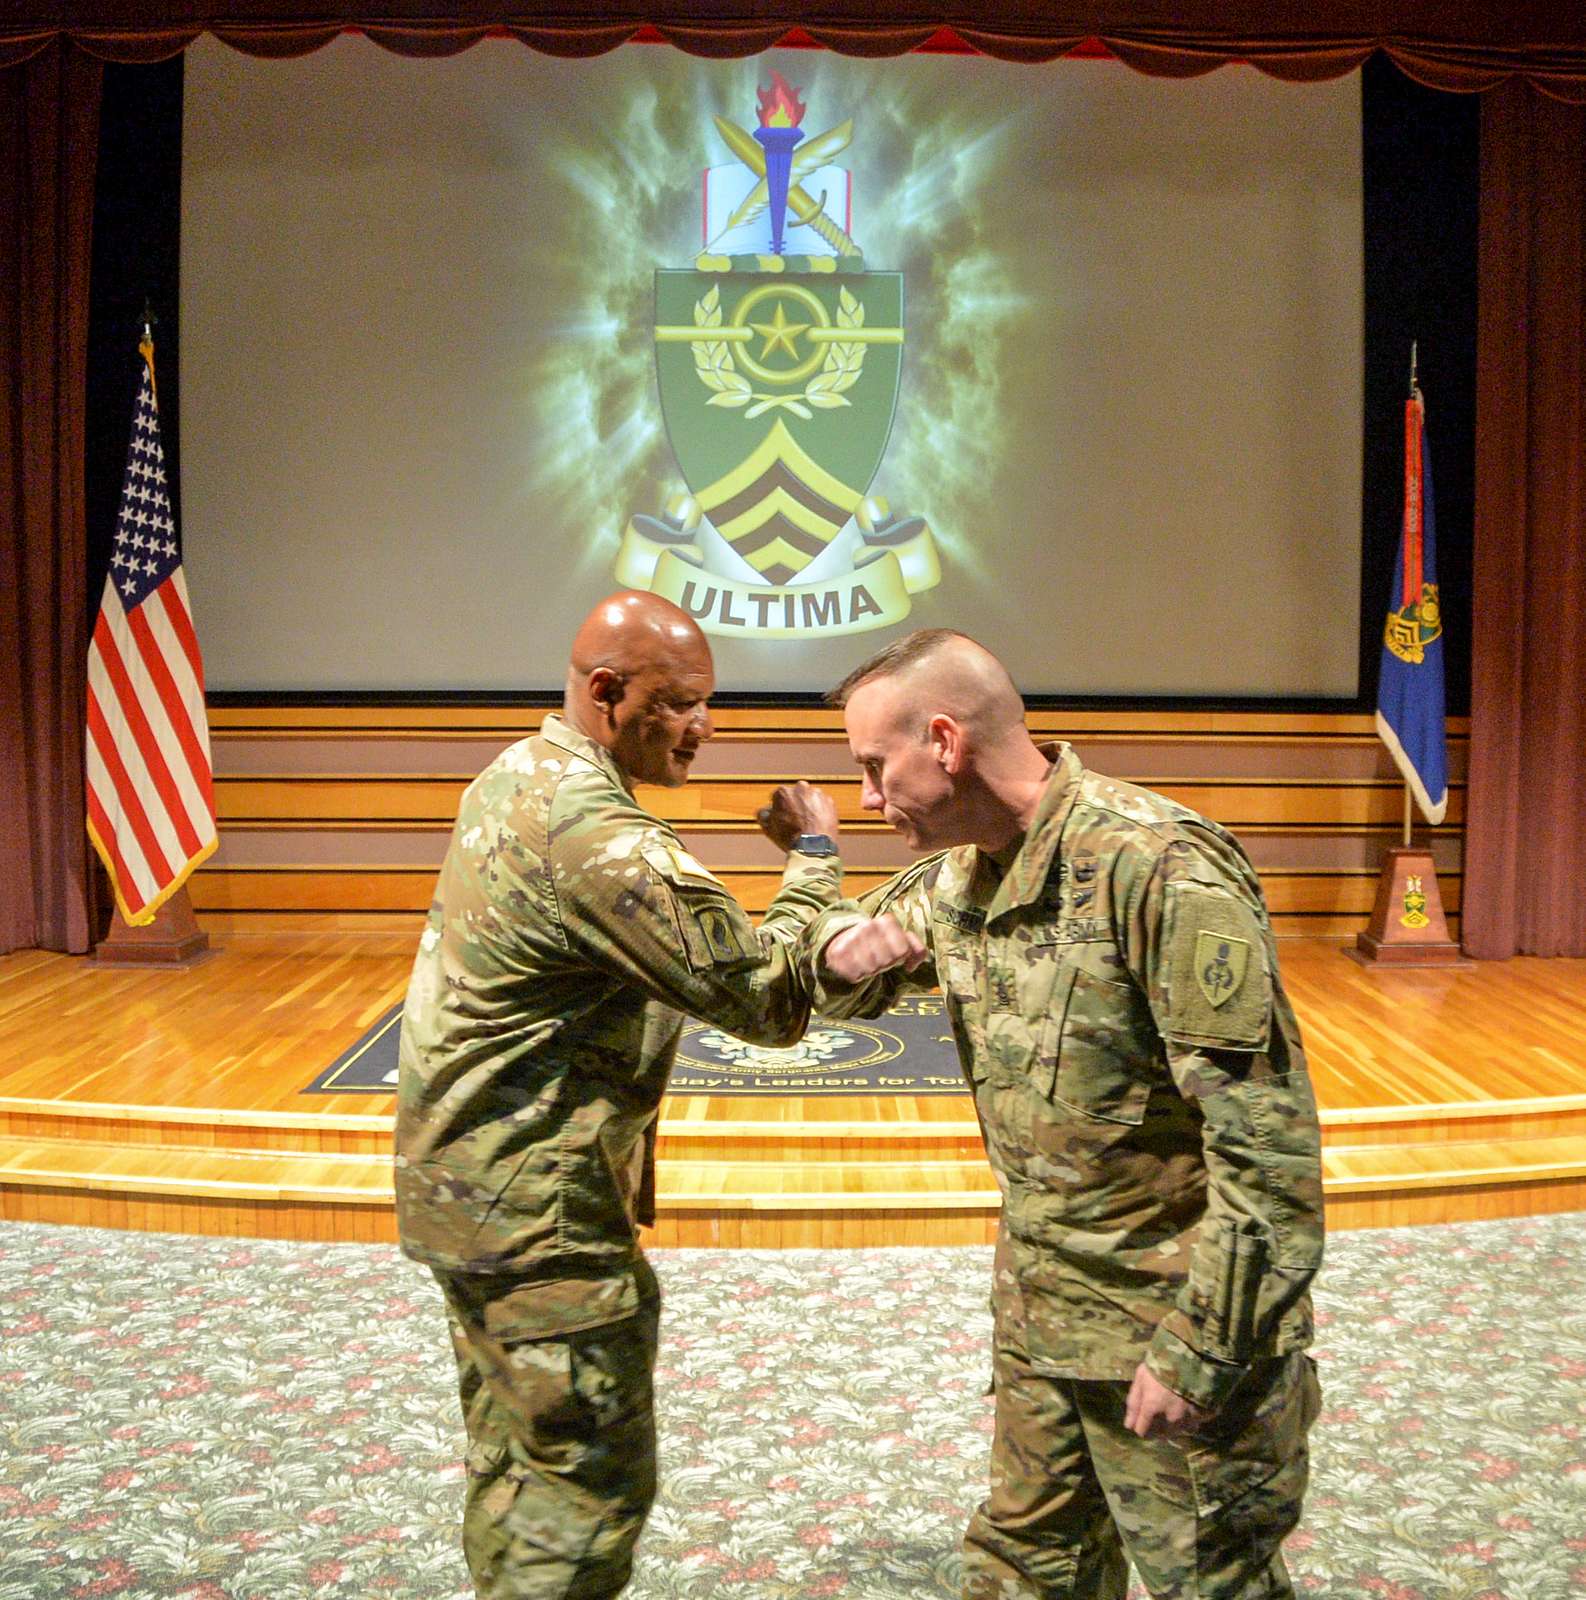 A Ceremony Held At The Nco Leadership Center Of Excellence Nara And Dvids Public Domain Archive